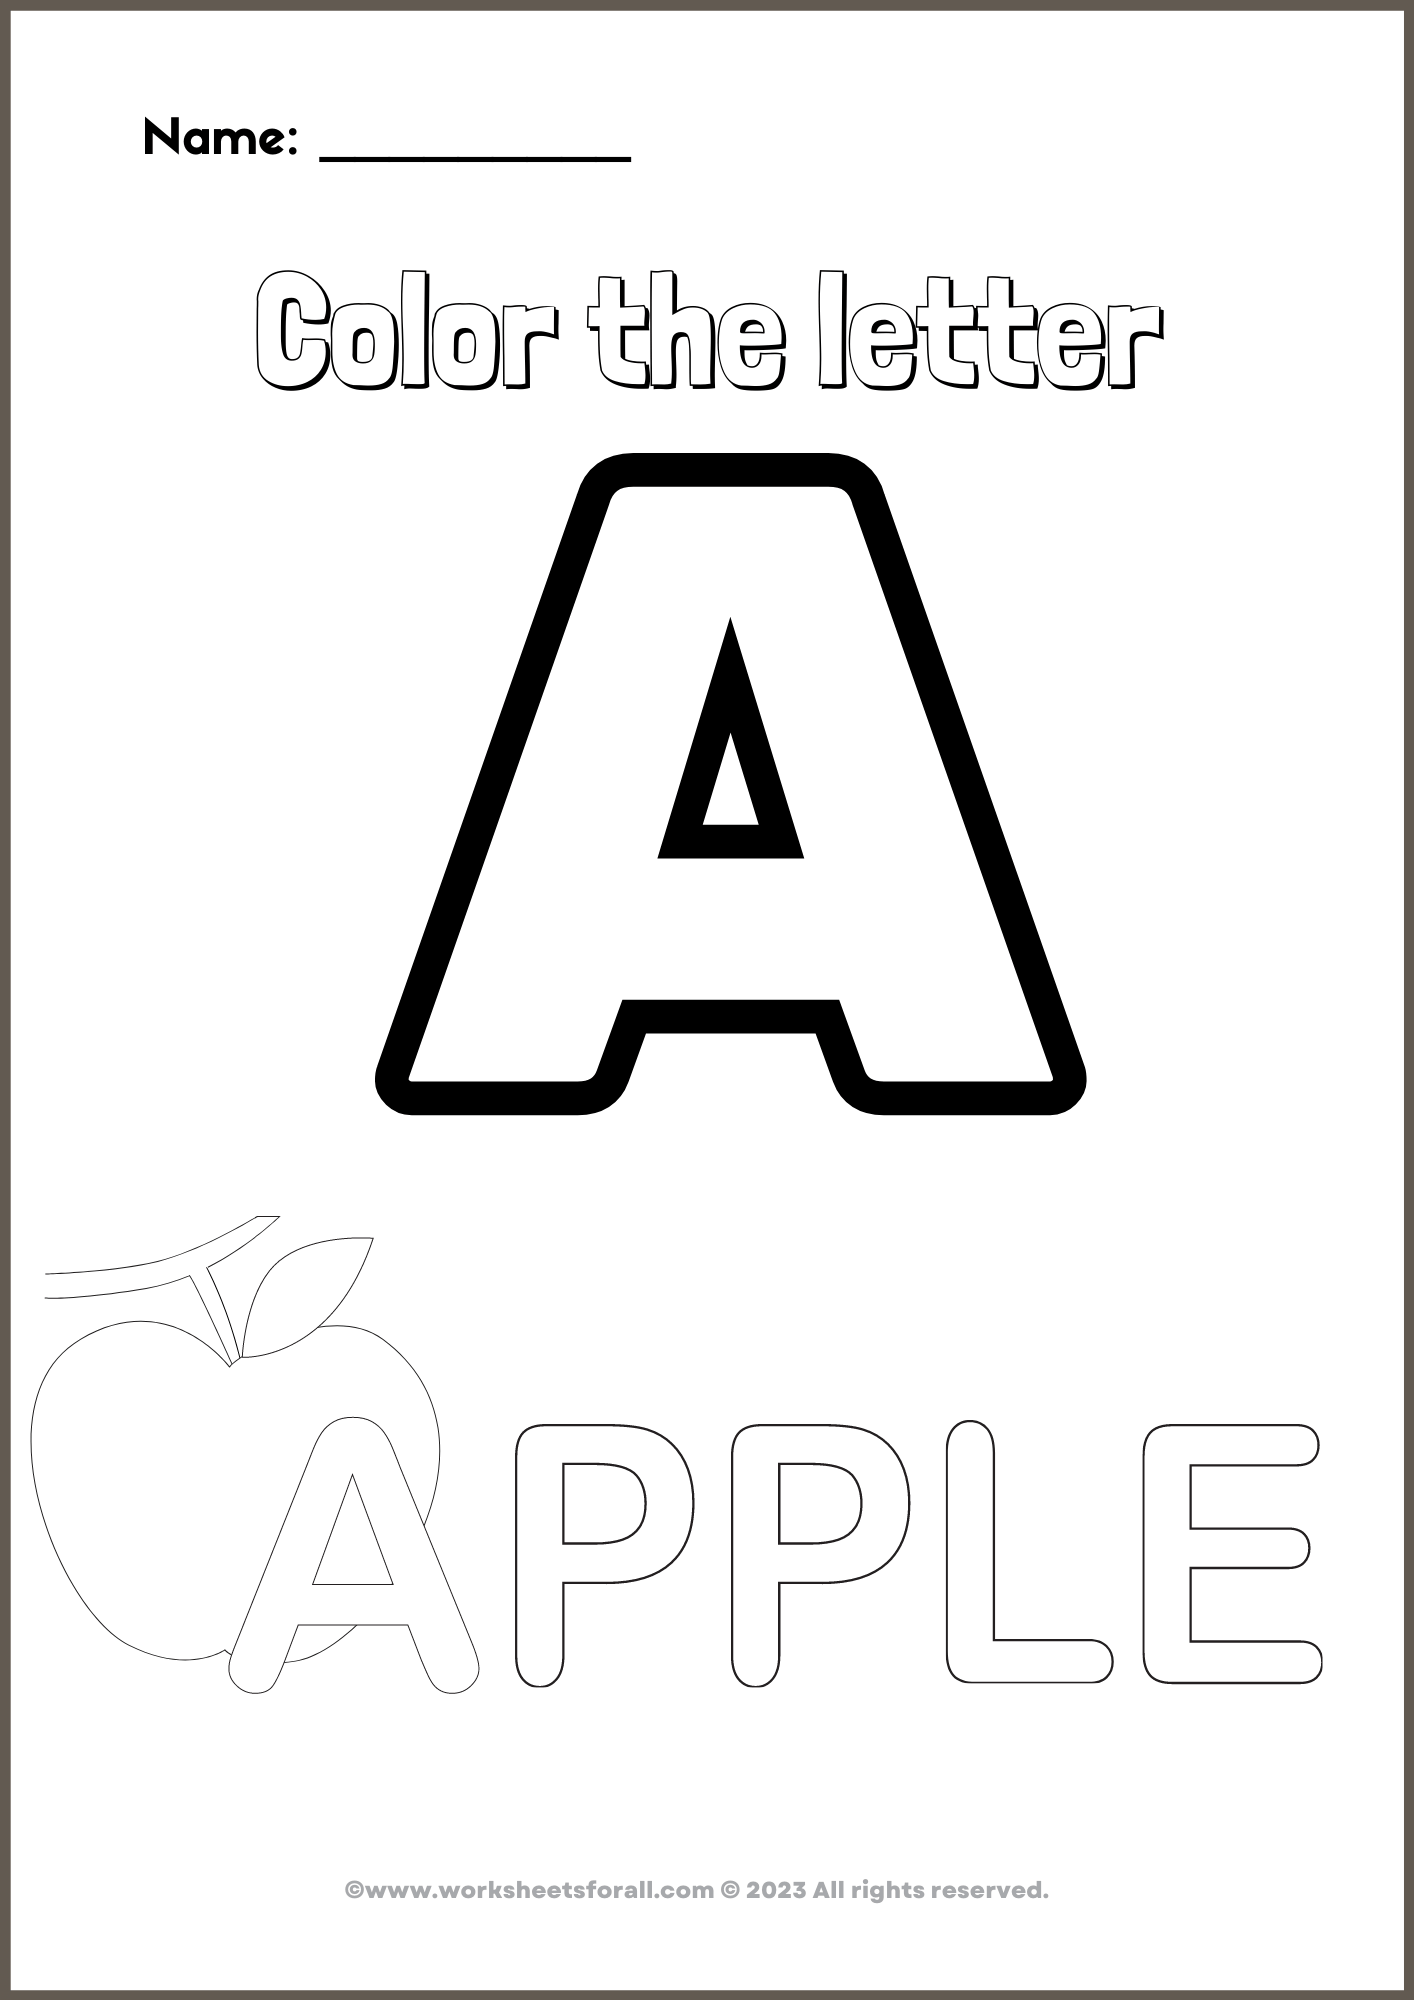 Free Alphabet Coloring Page - Coloring Sheets For All Ages